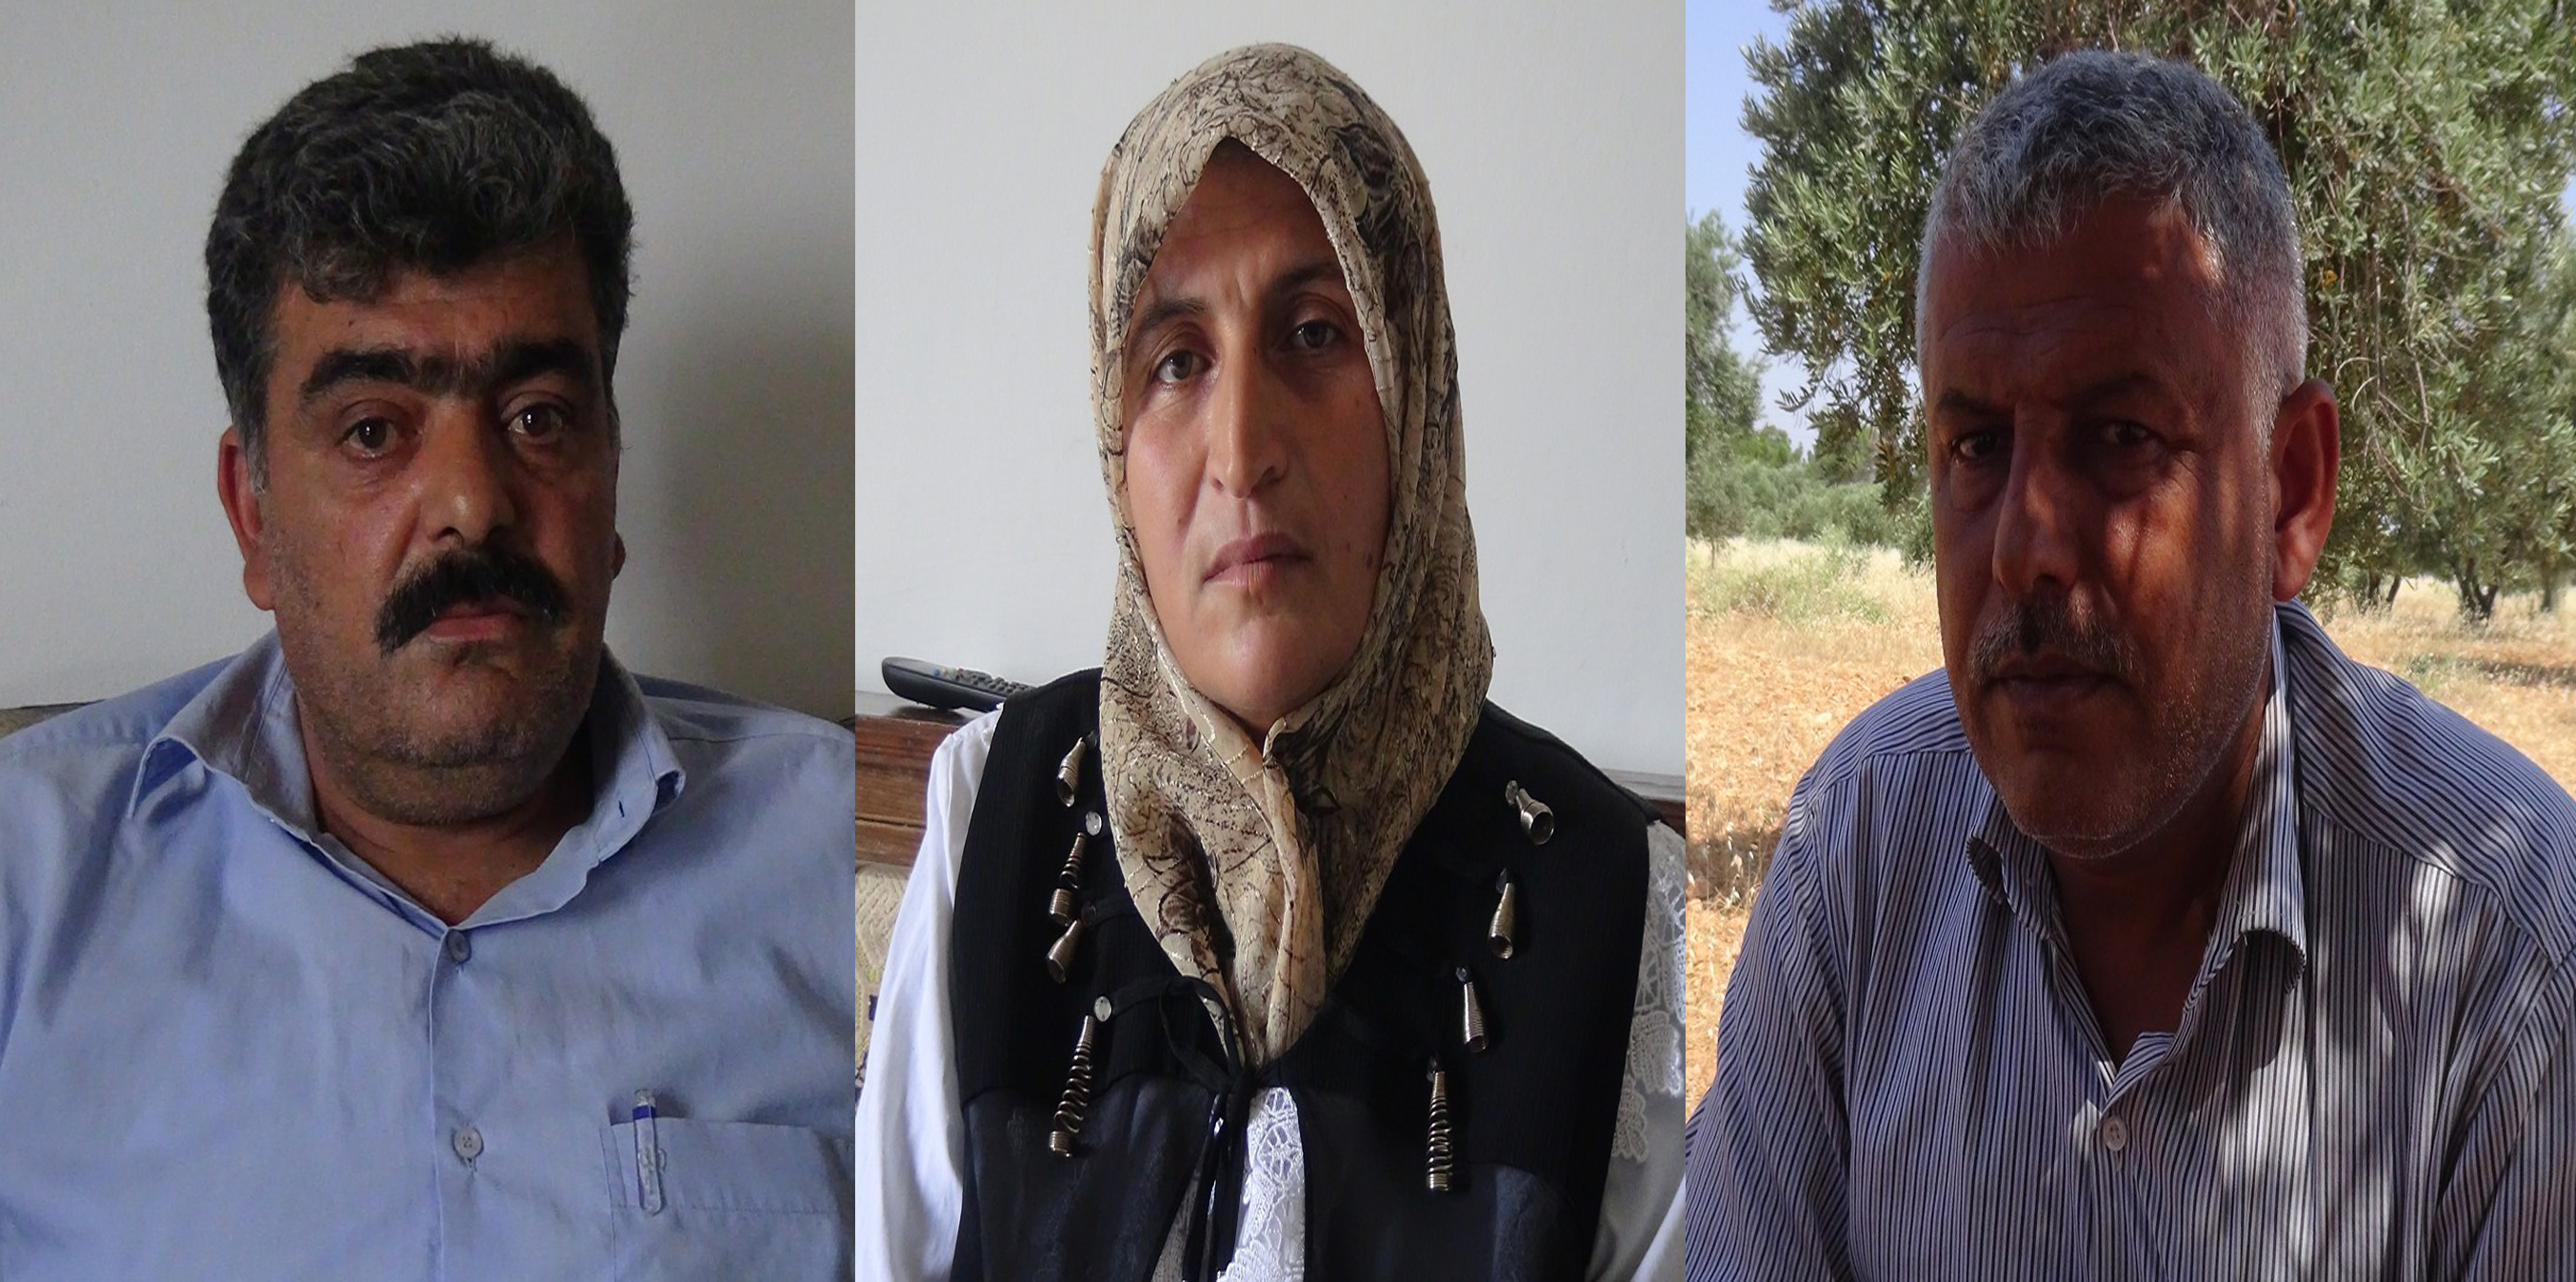 Al-Bab residents: we call to get occupier and gangs from our regions